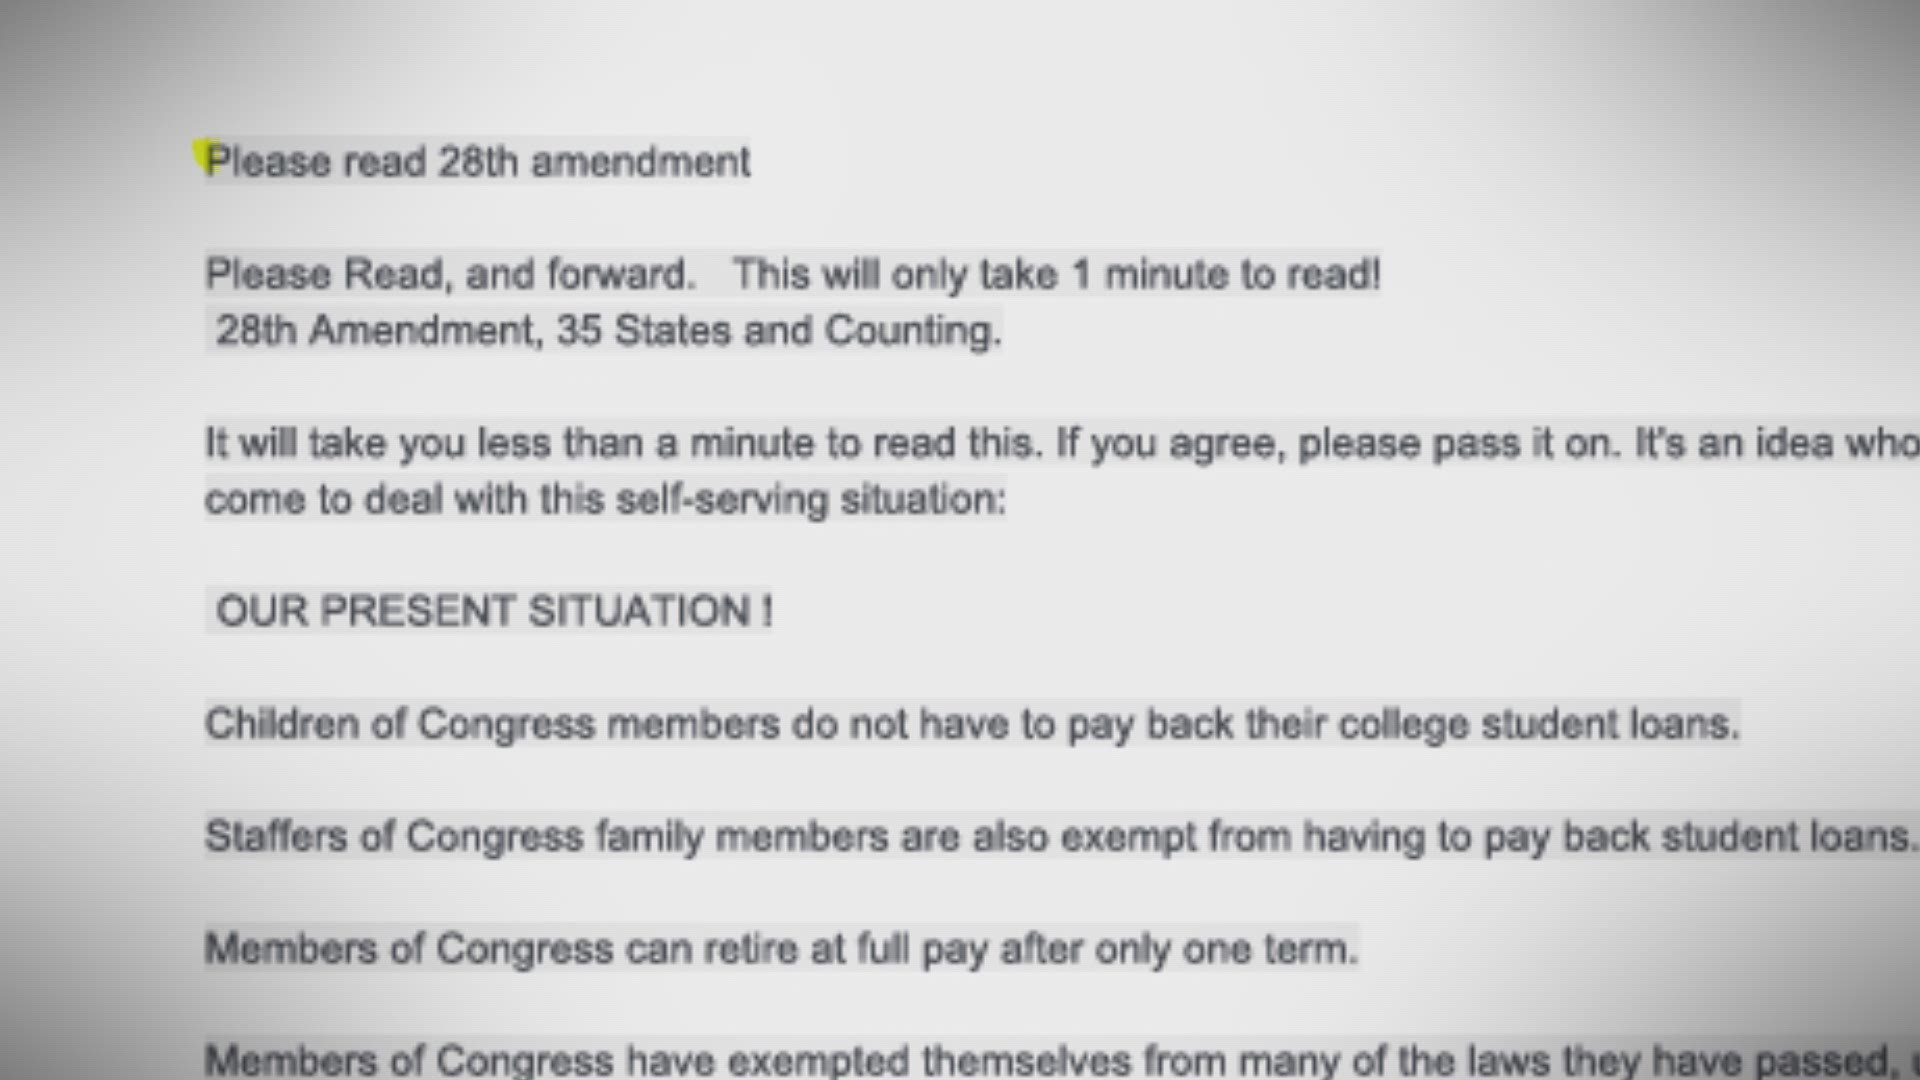 A viral message is claiming that members of Congress don't hold themselves to the same laws they write for the rest of us. Only problem? It's filled with misinformation and false claims.